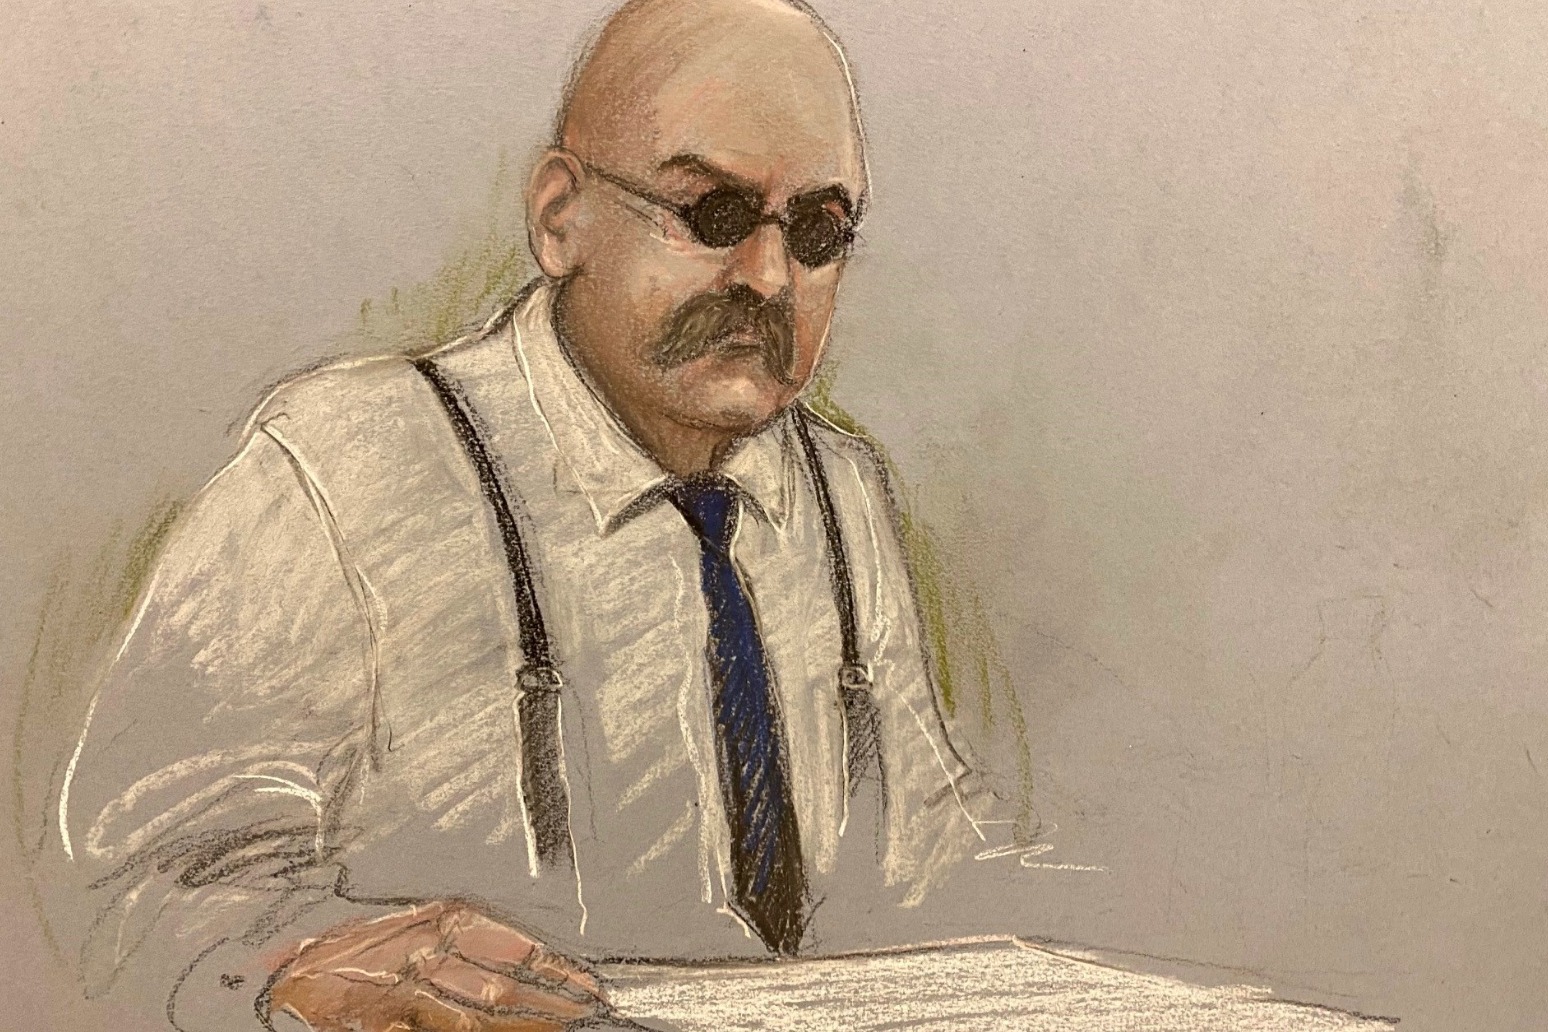 Prisoner Bronson tells parole hearing he is an ‘angel’ compared with past self 